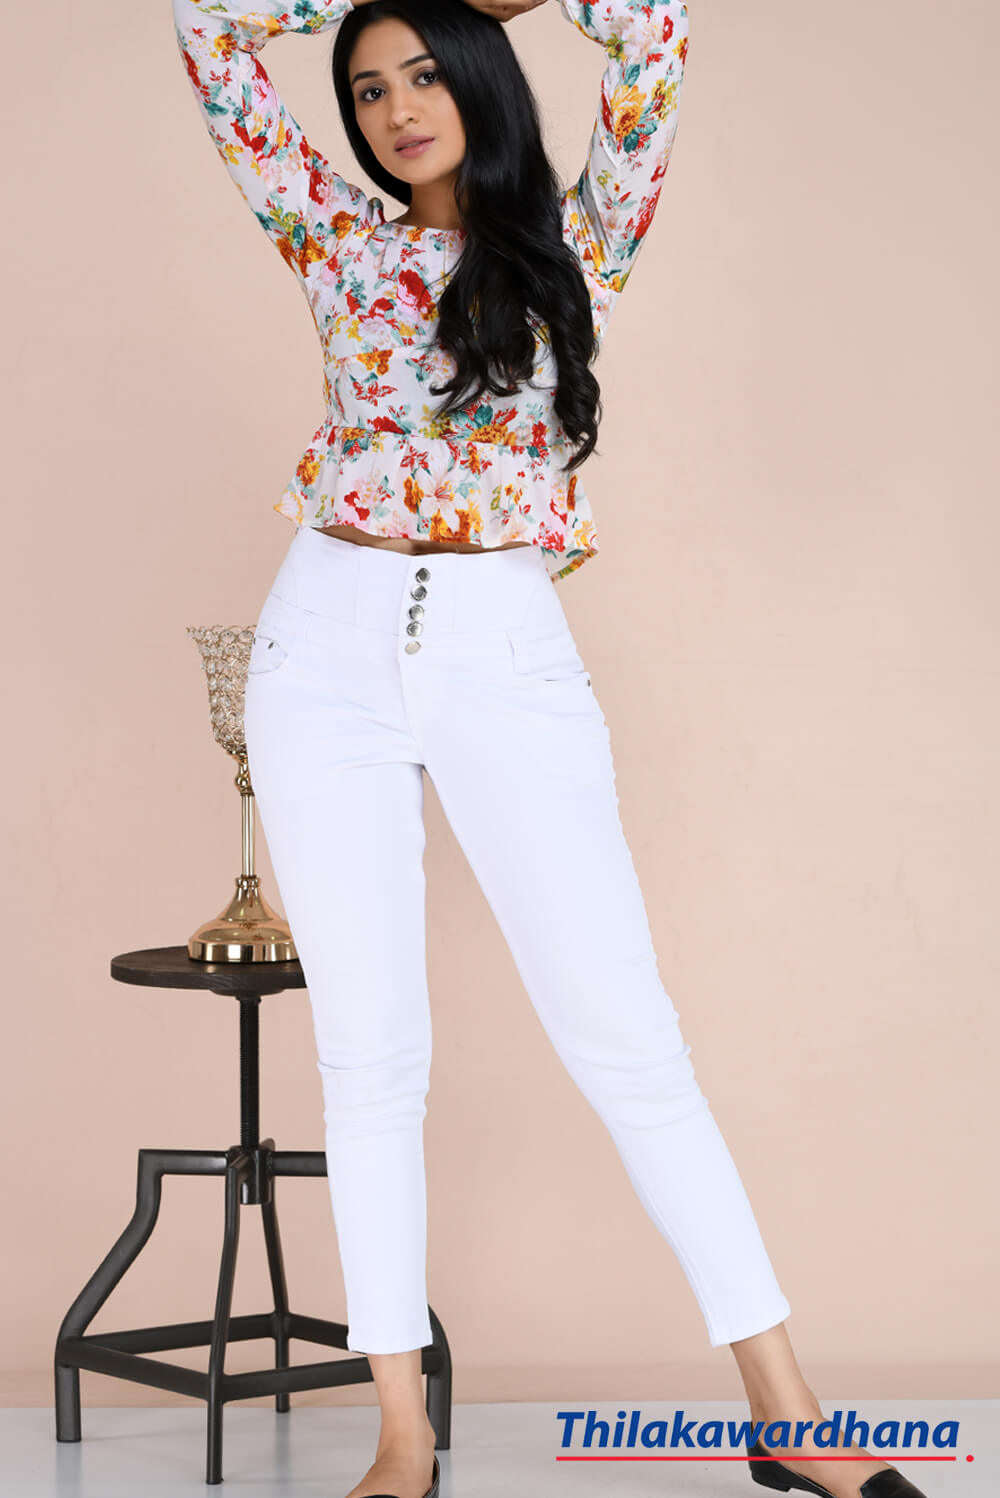 Buy FORGIVE Women's White Jeans | Skinny Fit Clean Look Jeans | Mid Rise  Stretchable Slim Fit Casual Jeans at Amazon.in